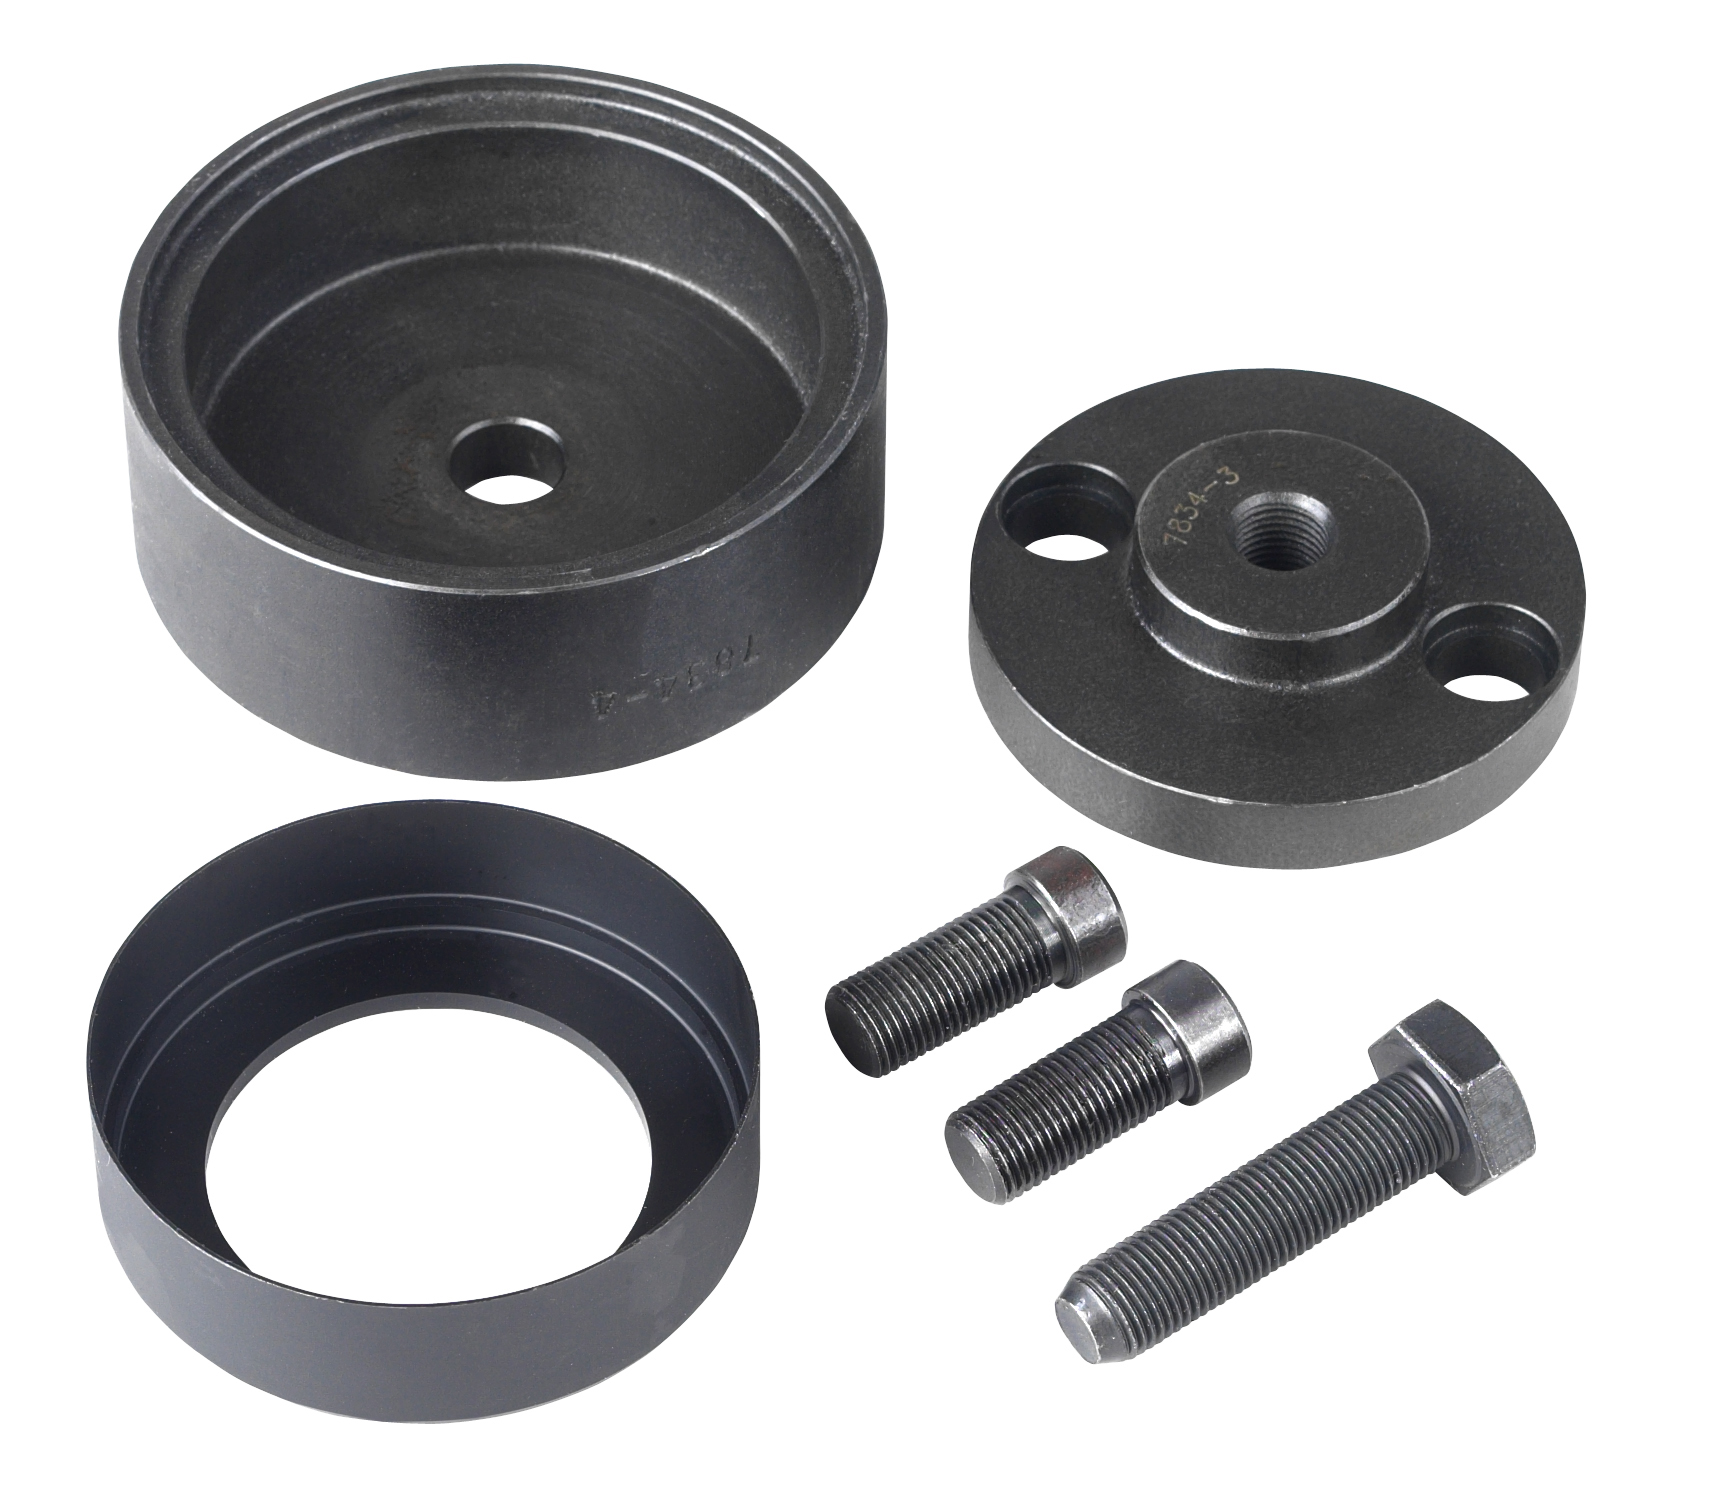 OTC 6889 Crankshaft Front Seal and Wear Ring Installer for Select 2008-10 Ford Applications 